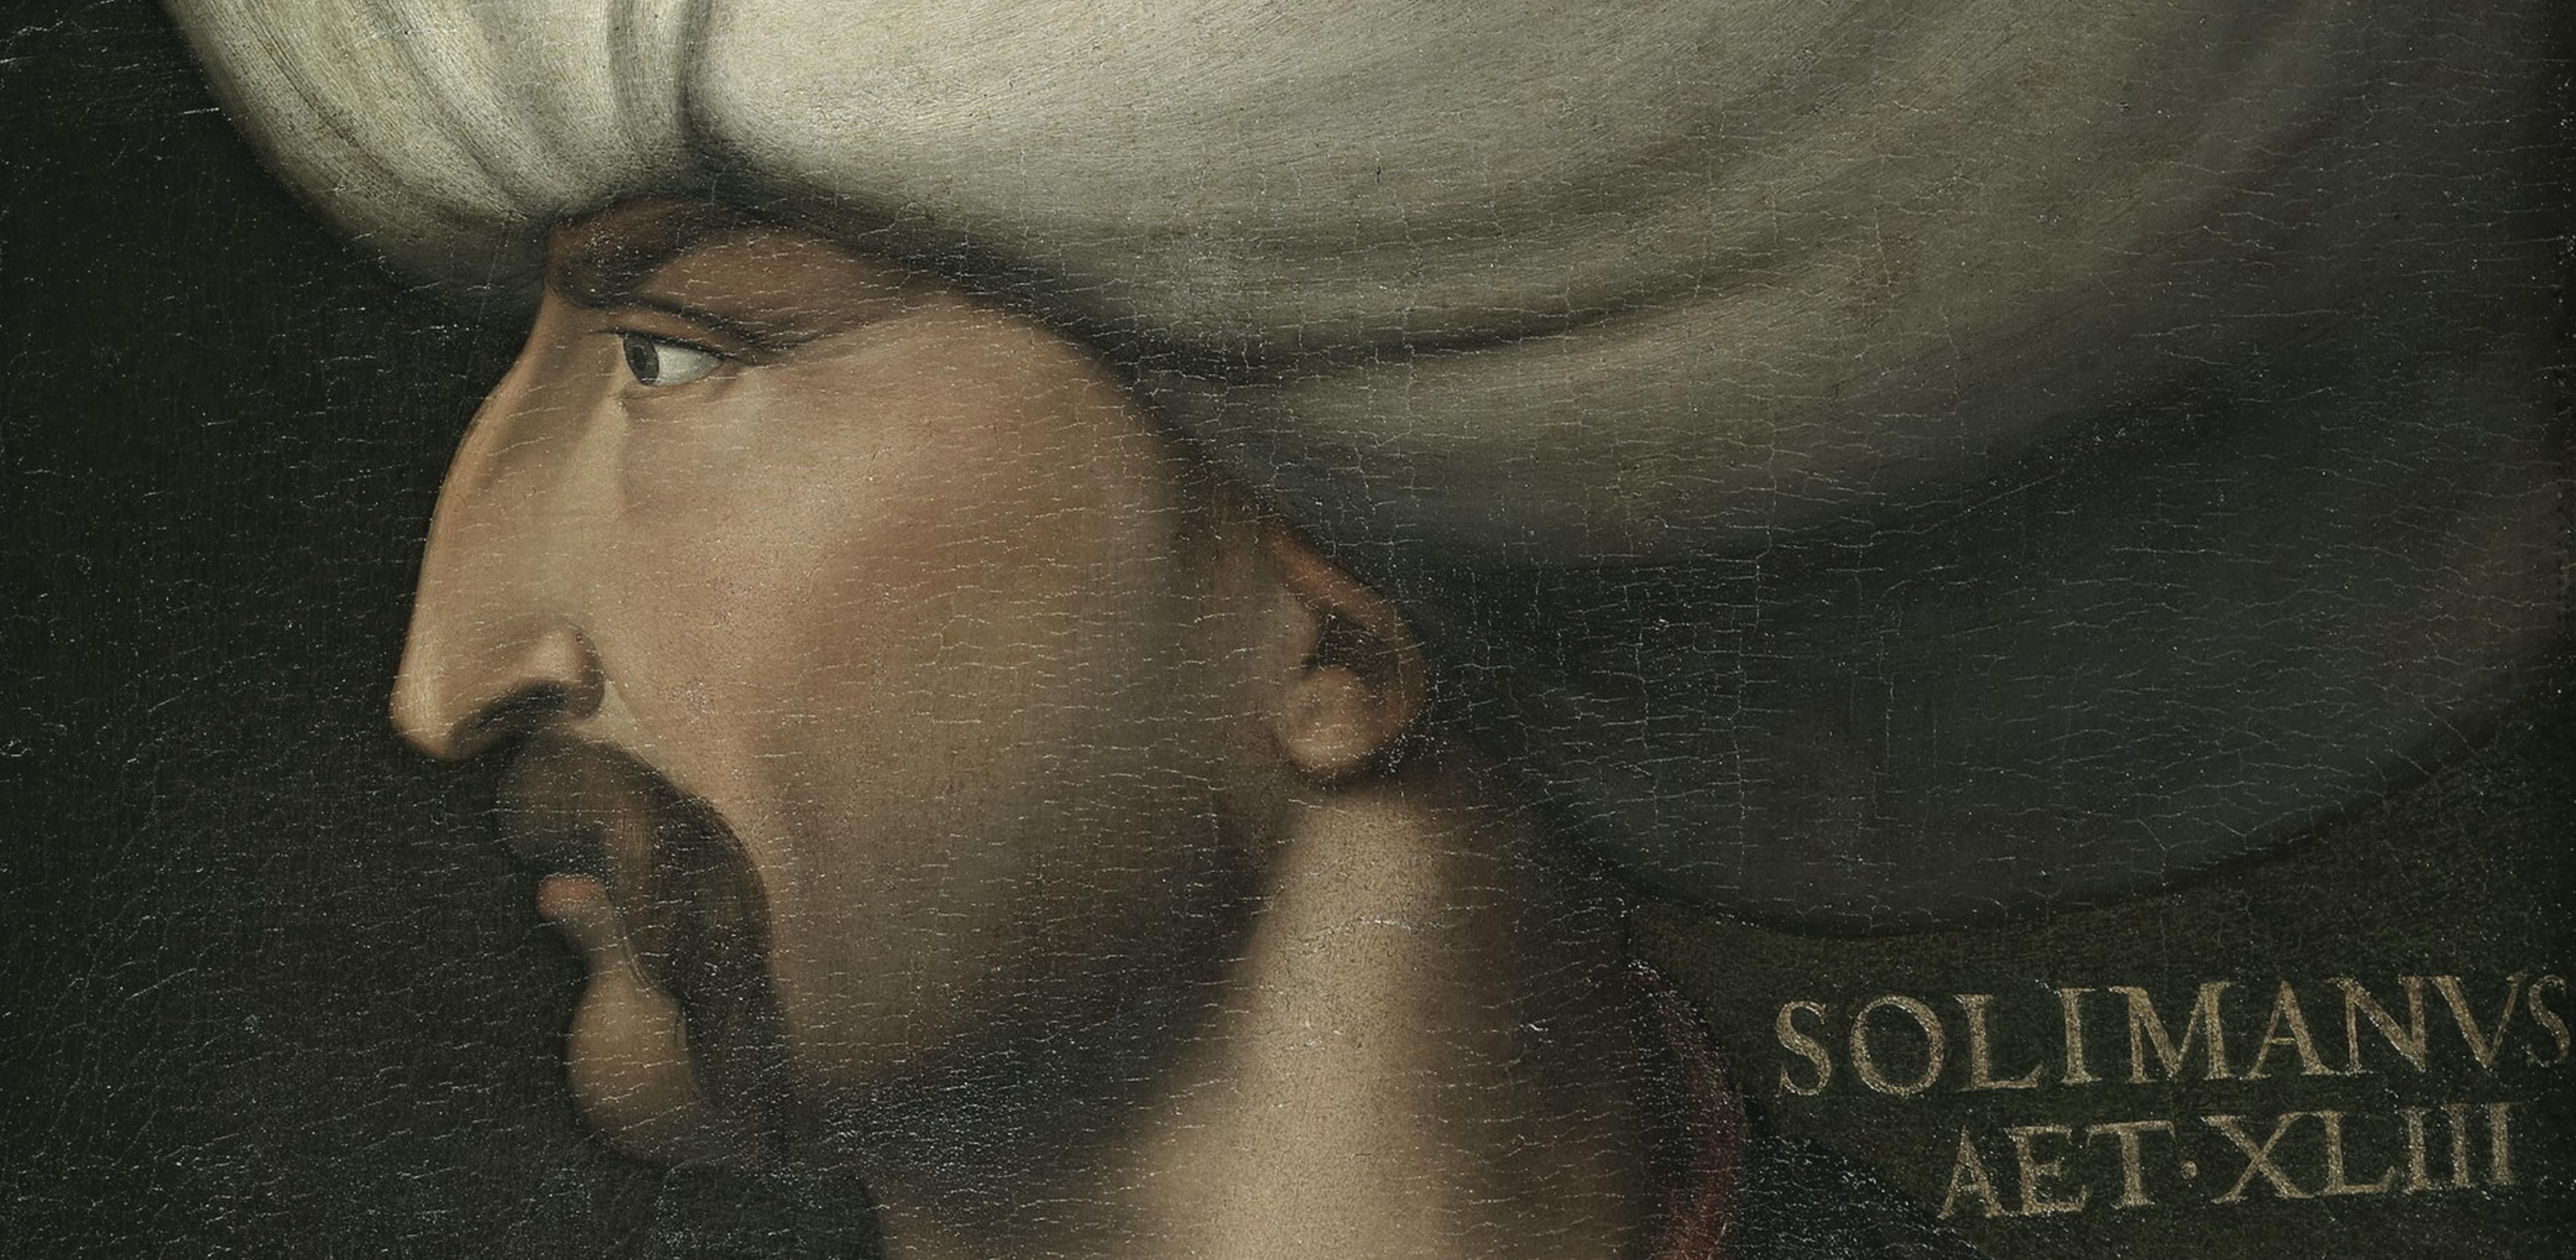 Islamic Art and Florence from the Medici to the 20th century